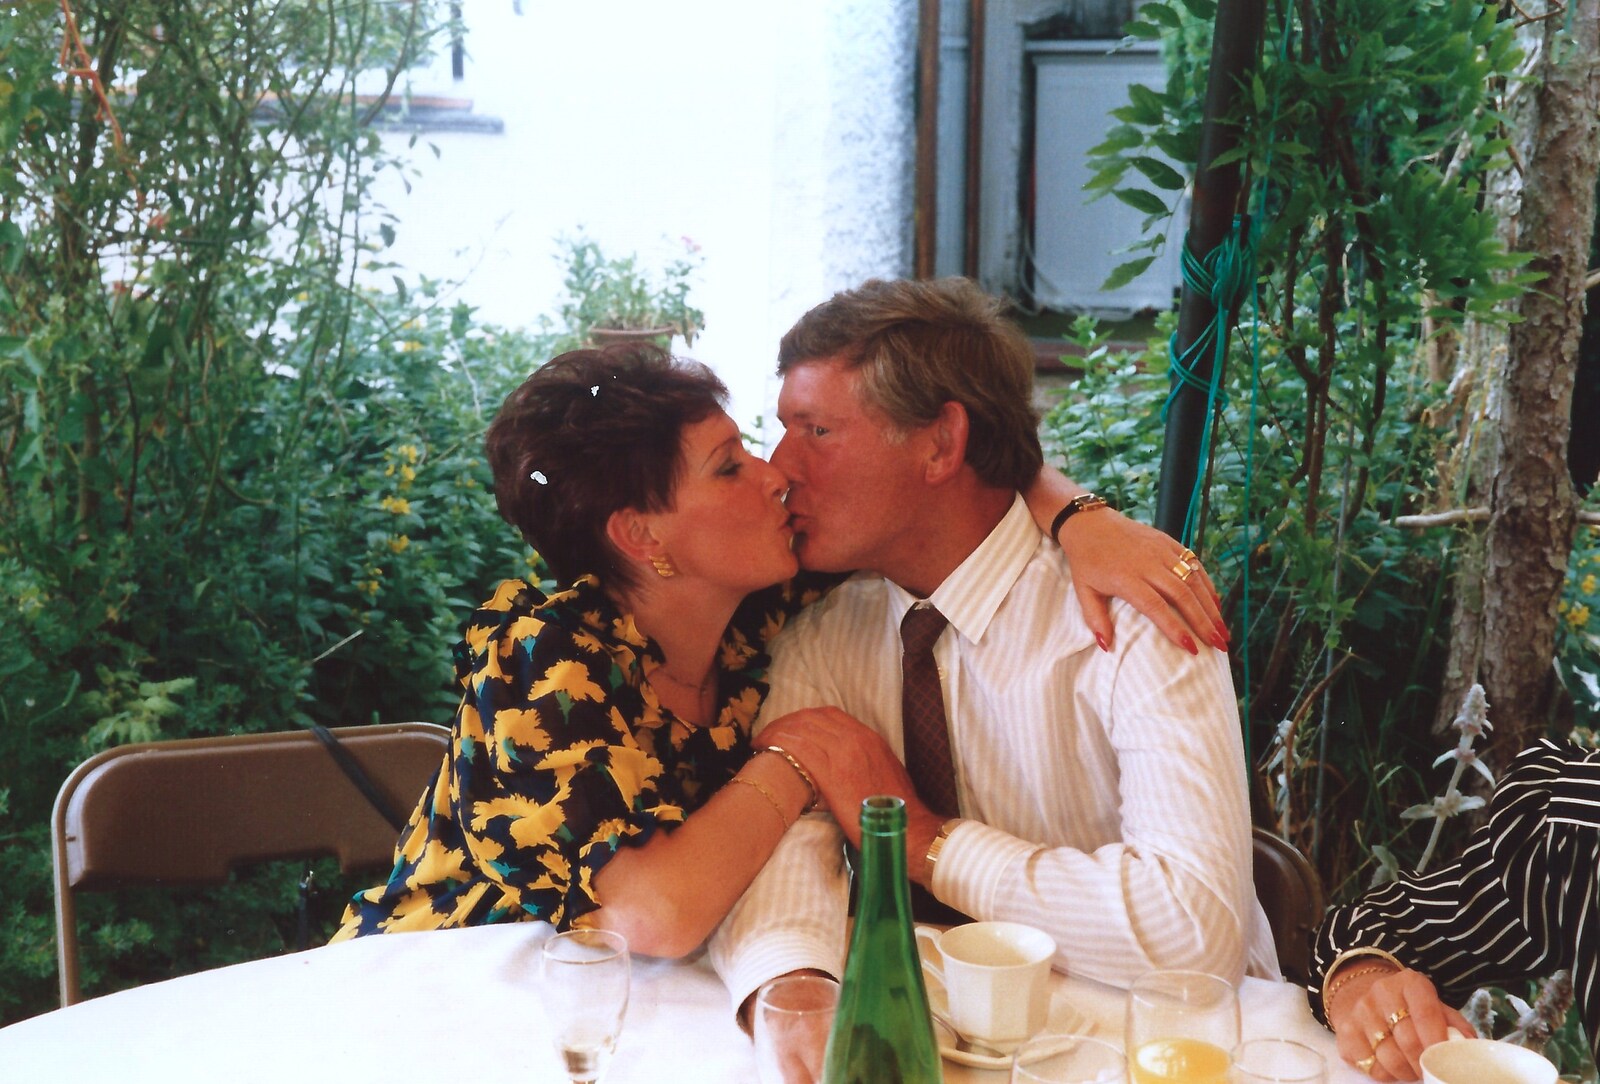 Judith and Brian grab a quick snog from Mother and Mike's Wedding Reception, Bransgore, Dorset - 20th August 1988